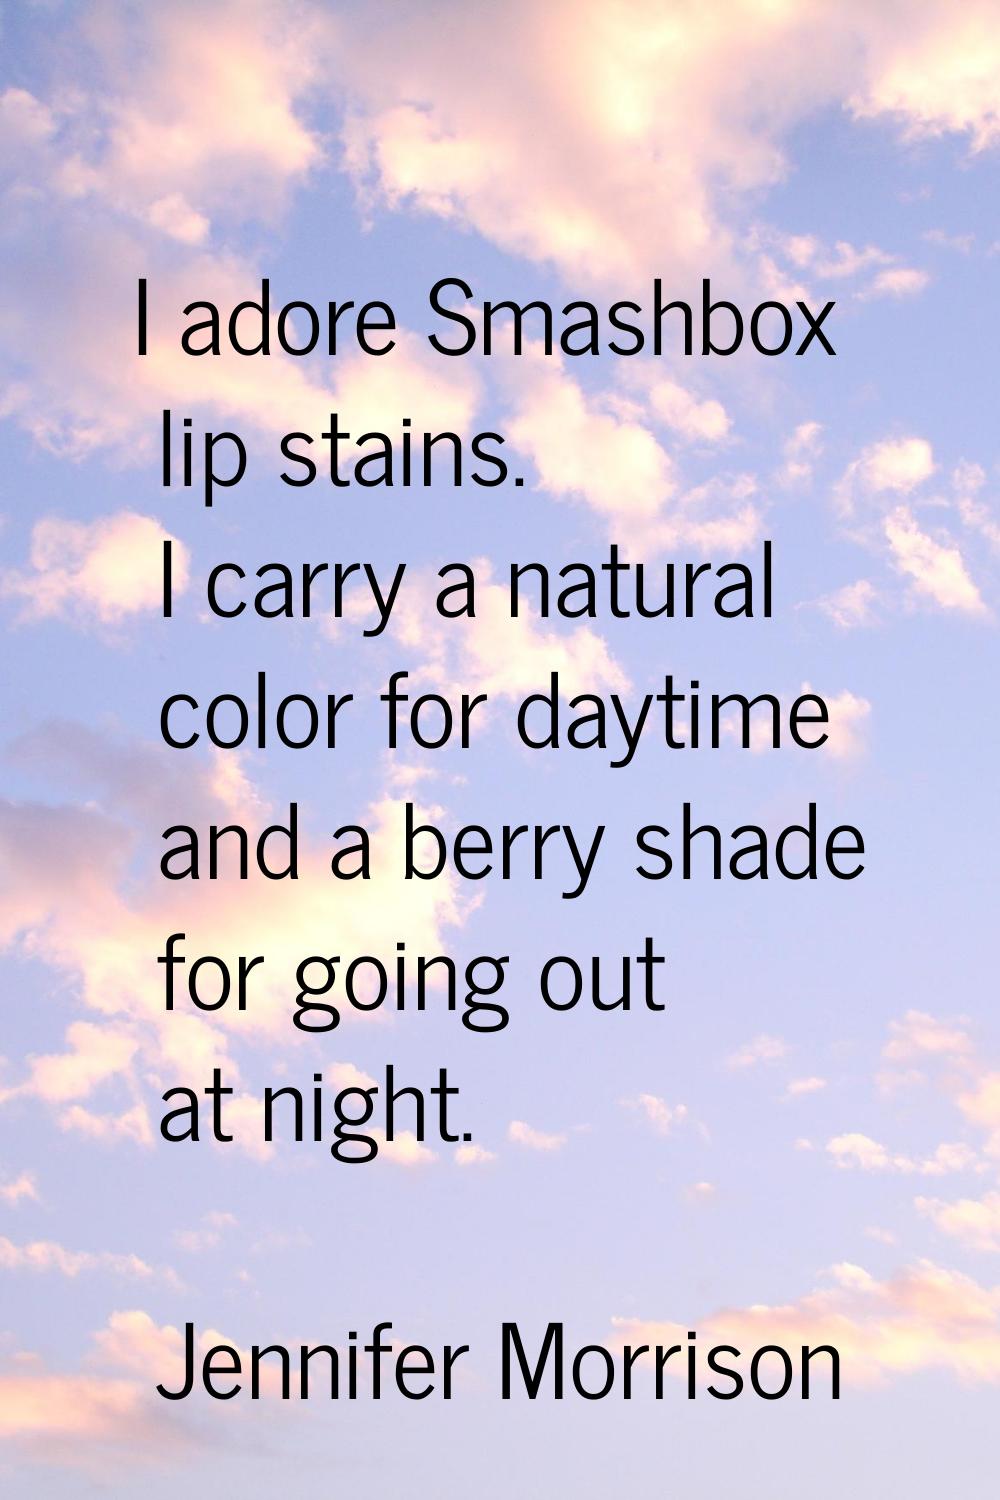 I adore Smashbox lip stains. I carry a natural color for daytime and a berry shade for going out at